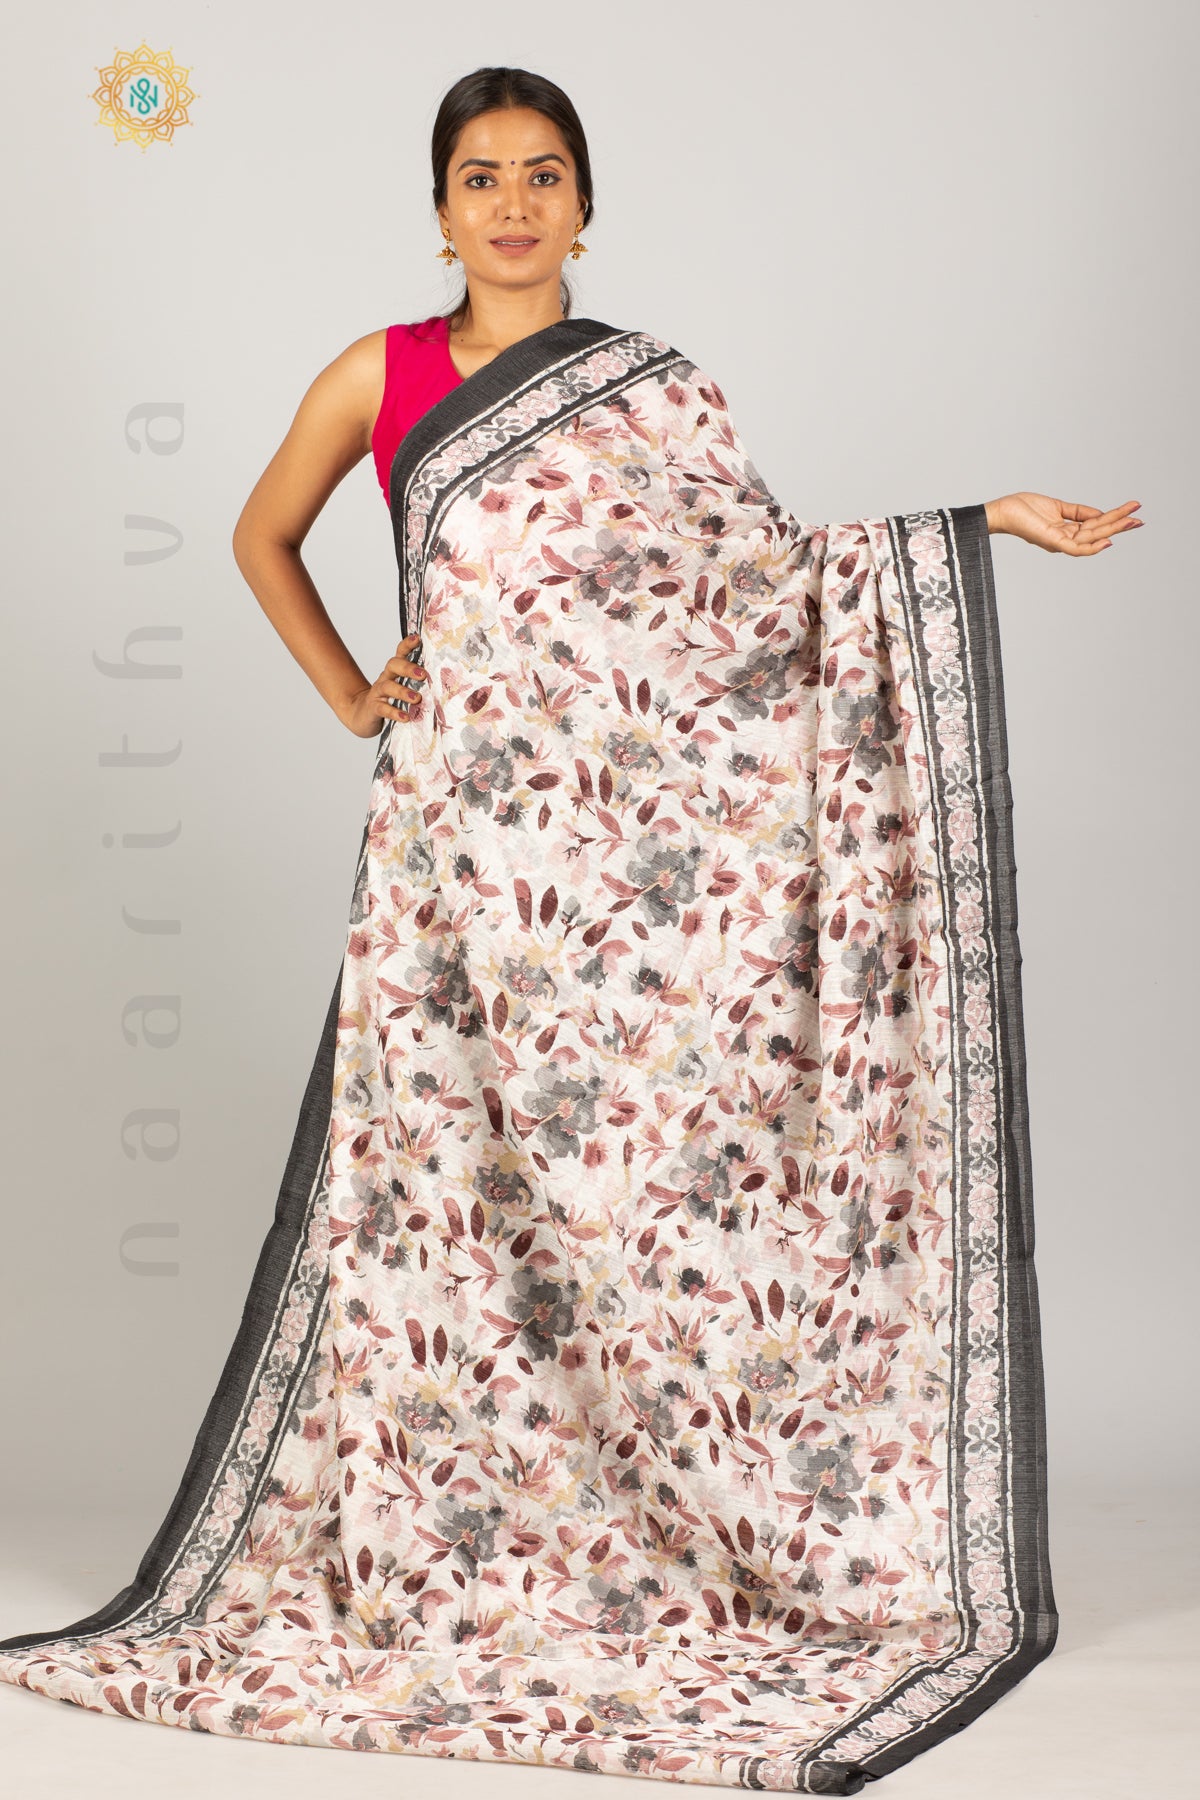 KOTHA LINEN WITH DIGITAL PRINTS ON THE BODY